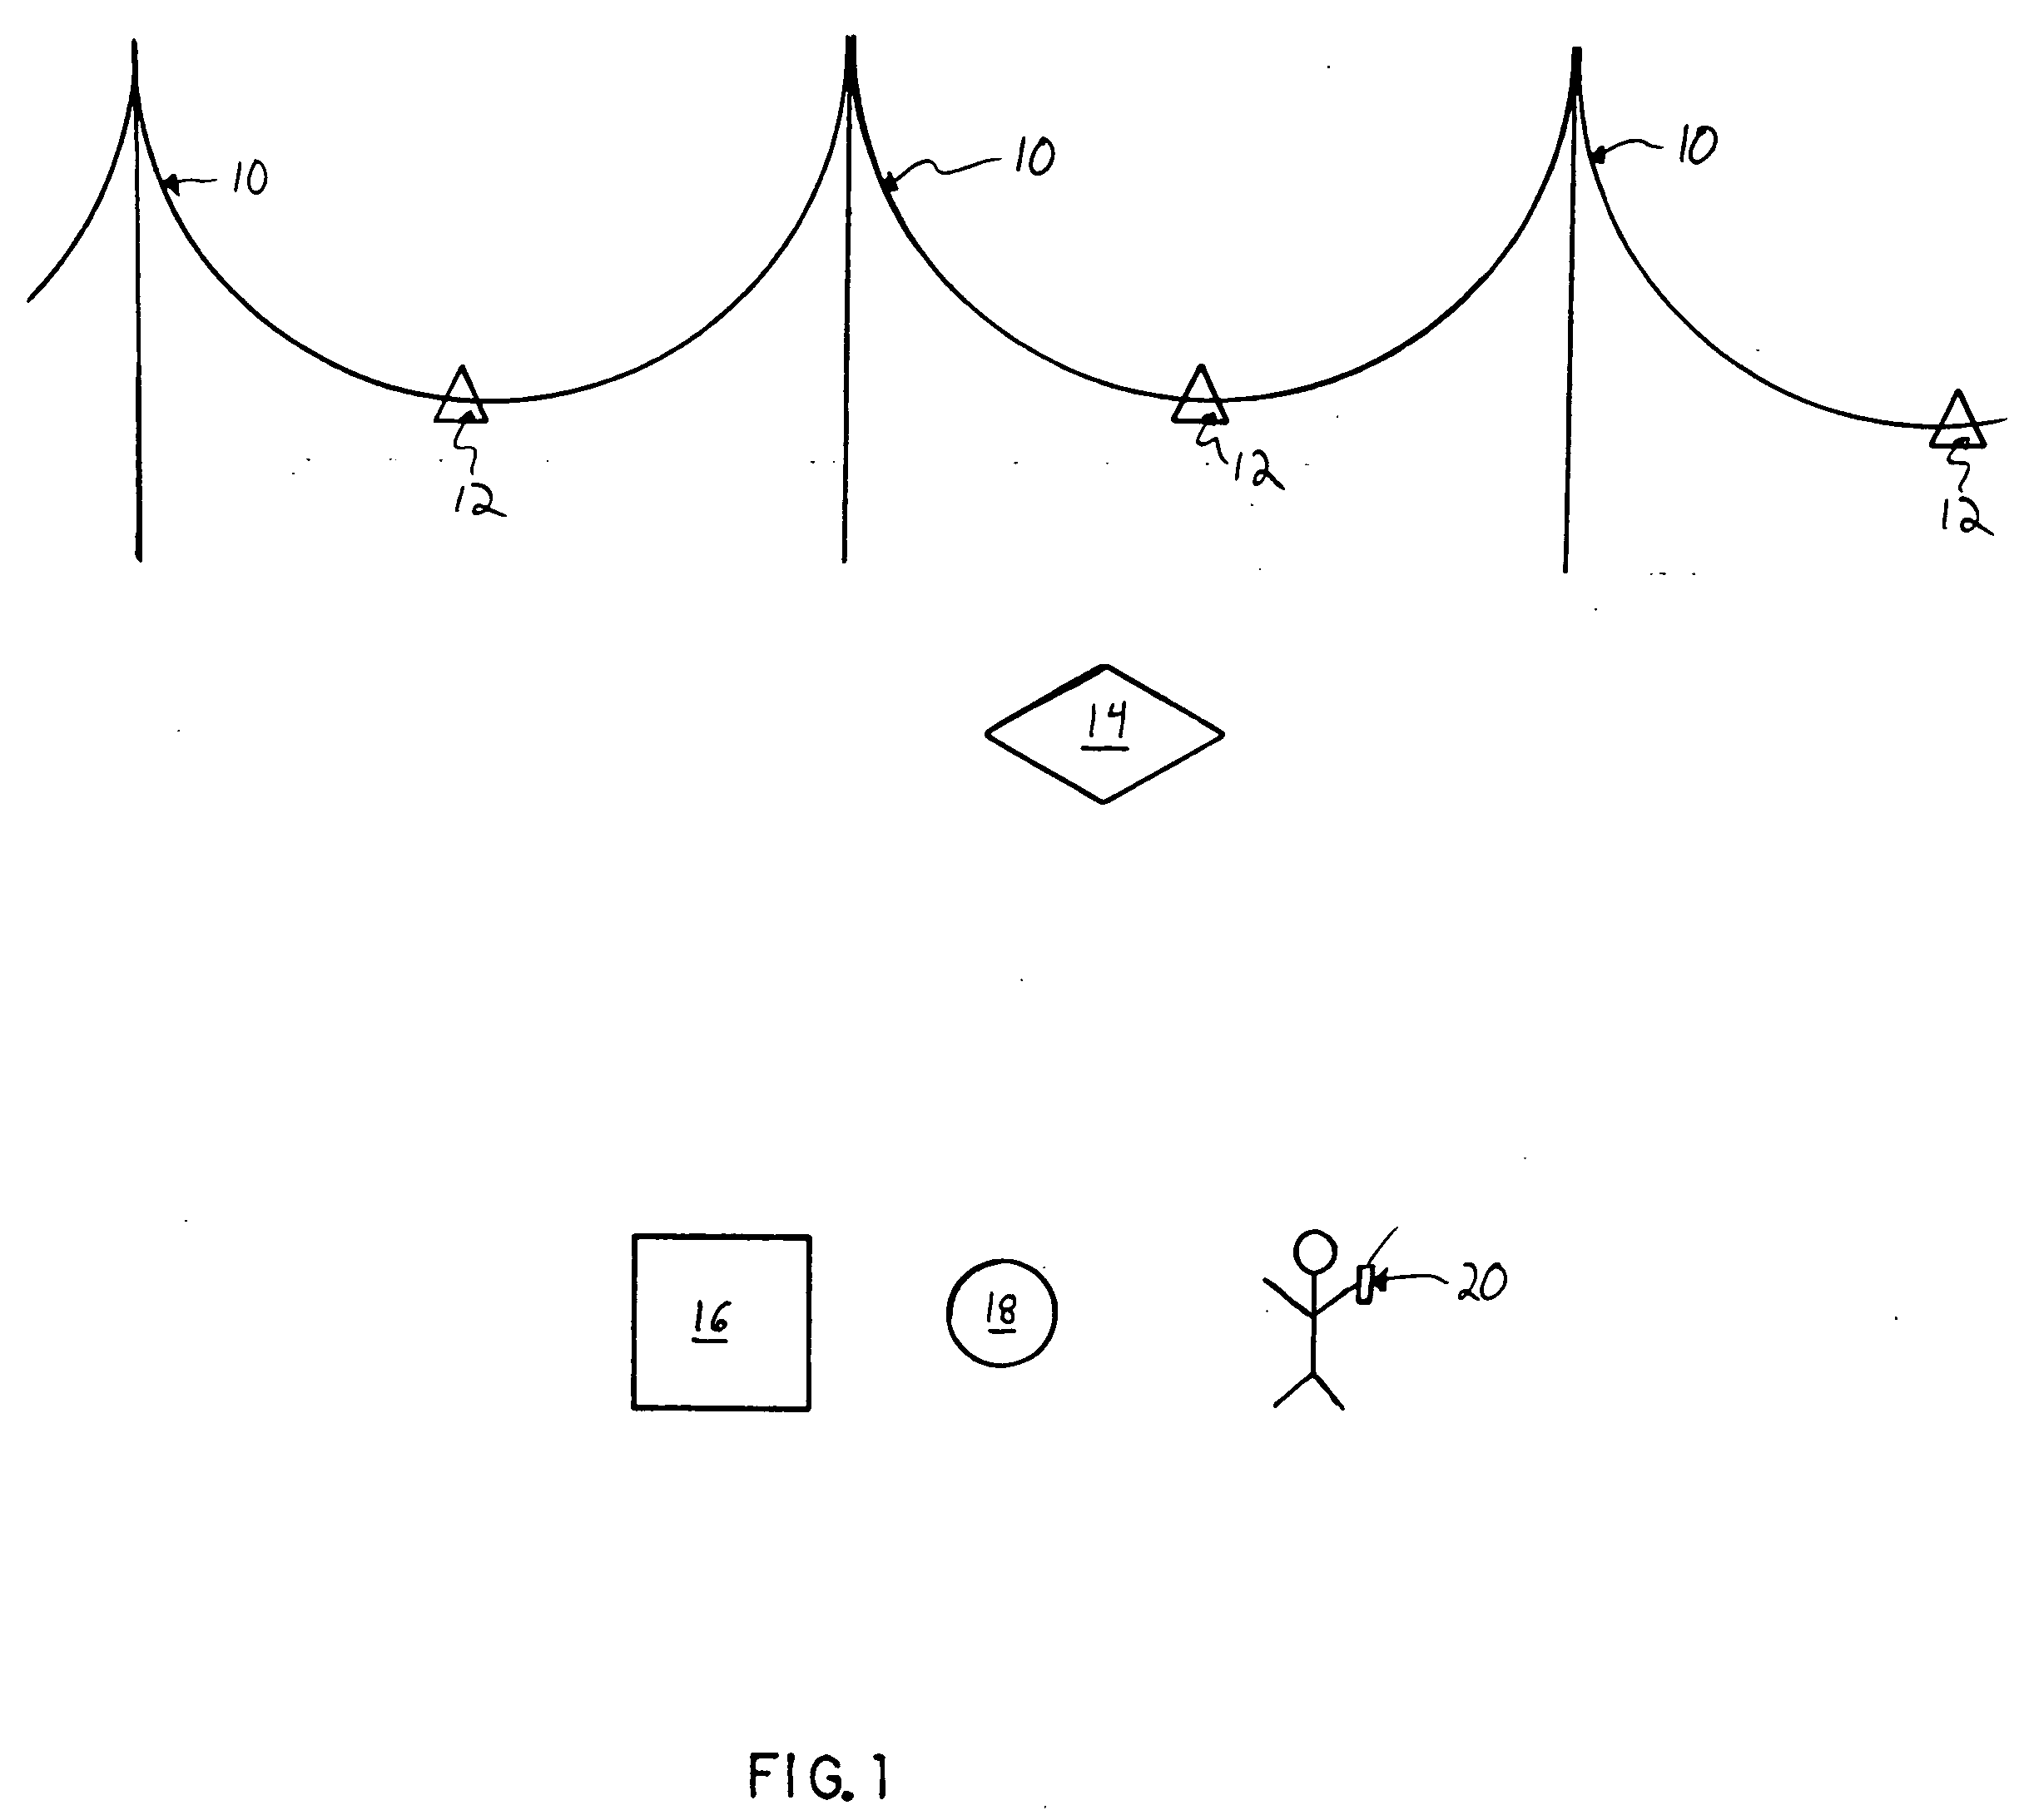 Transmission/distribution line fault indicator with remote polling and current sensing and reporting capability